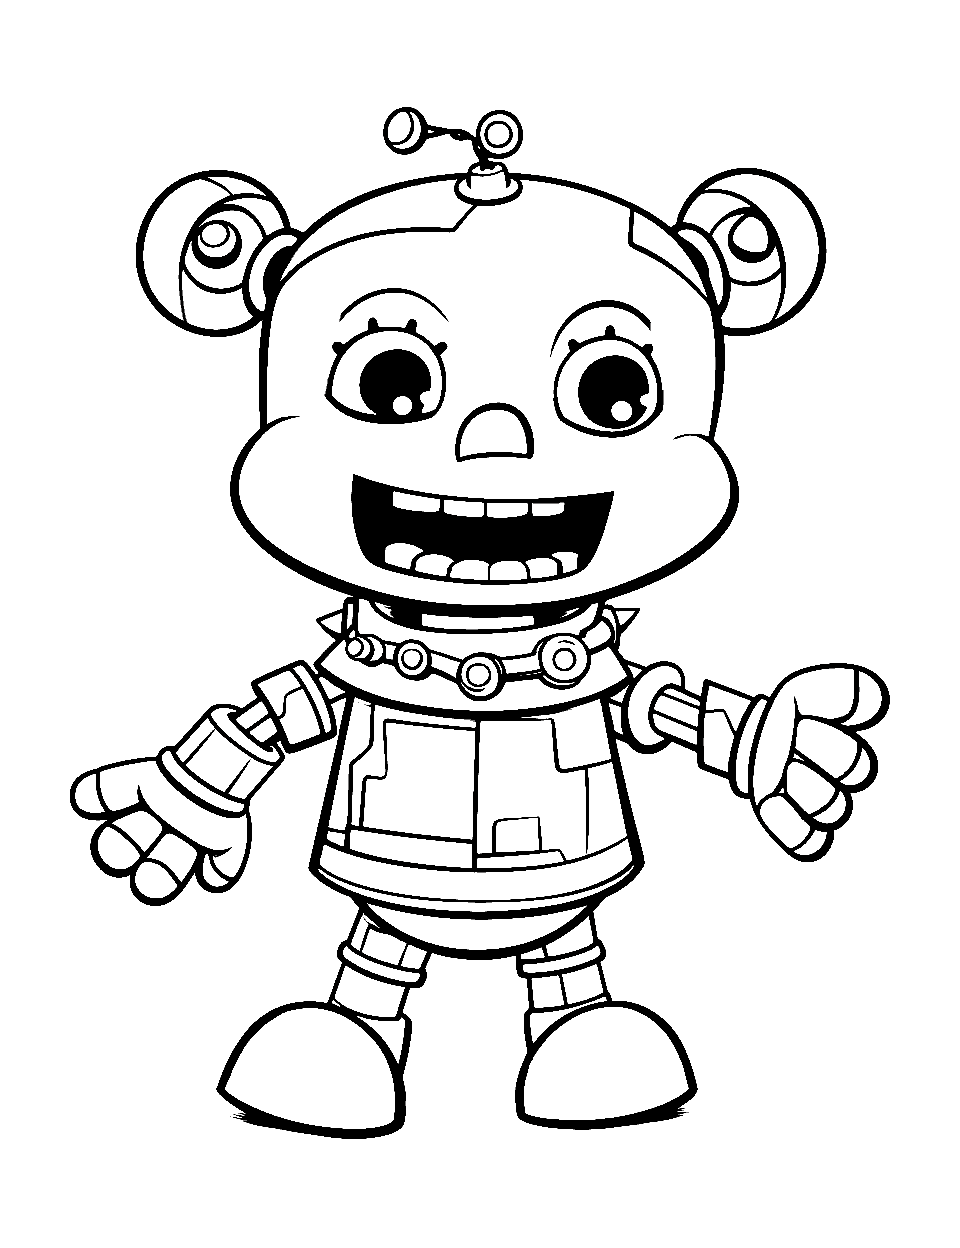 25 Free Five Nights At Freddy's Coloring Pages for Fans